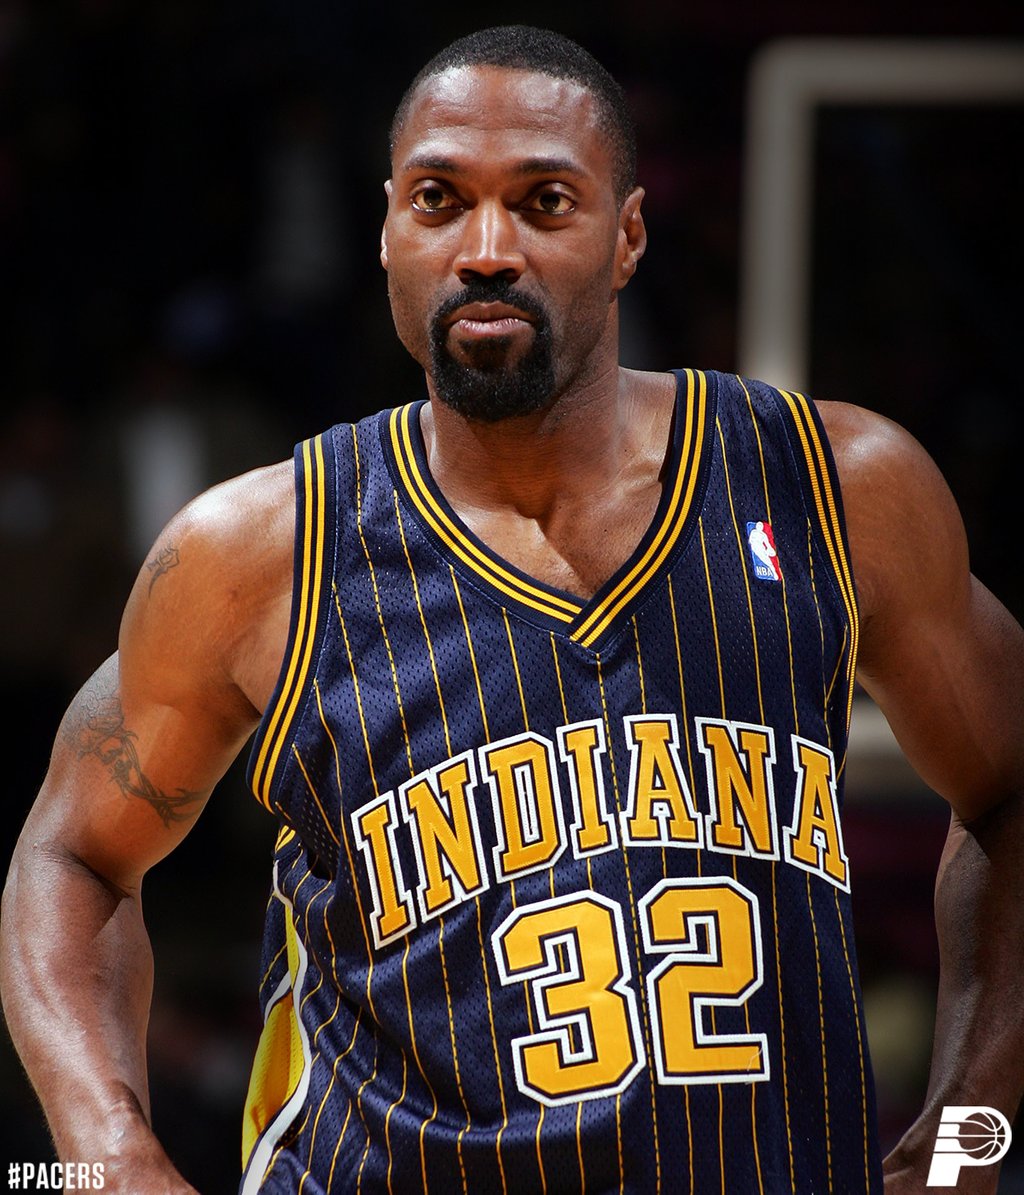 Indiana Pacers - The regular season is Dale Davis number of days away.